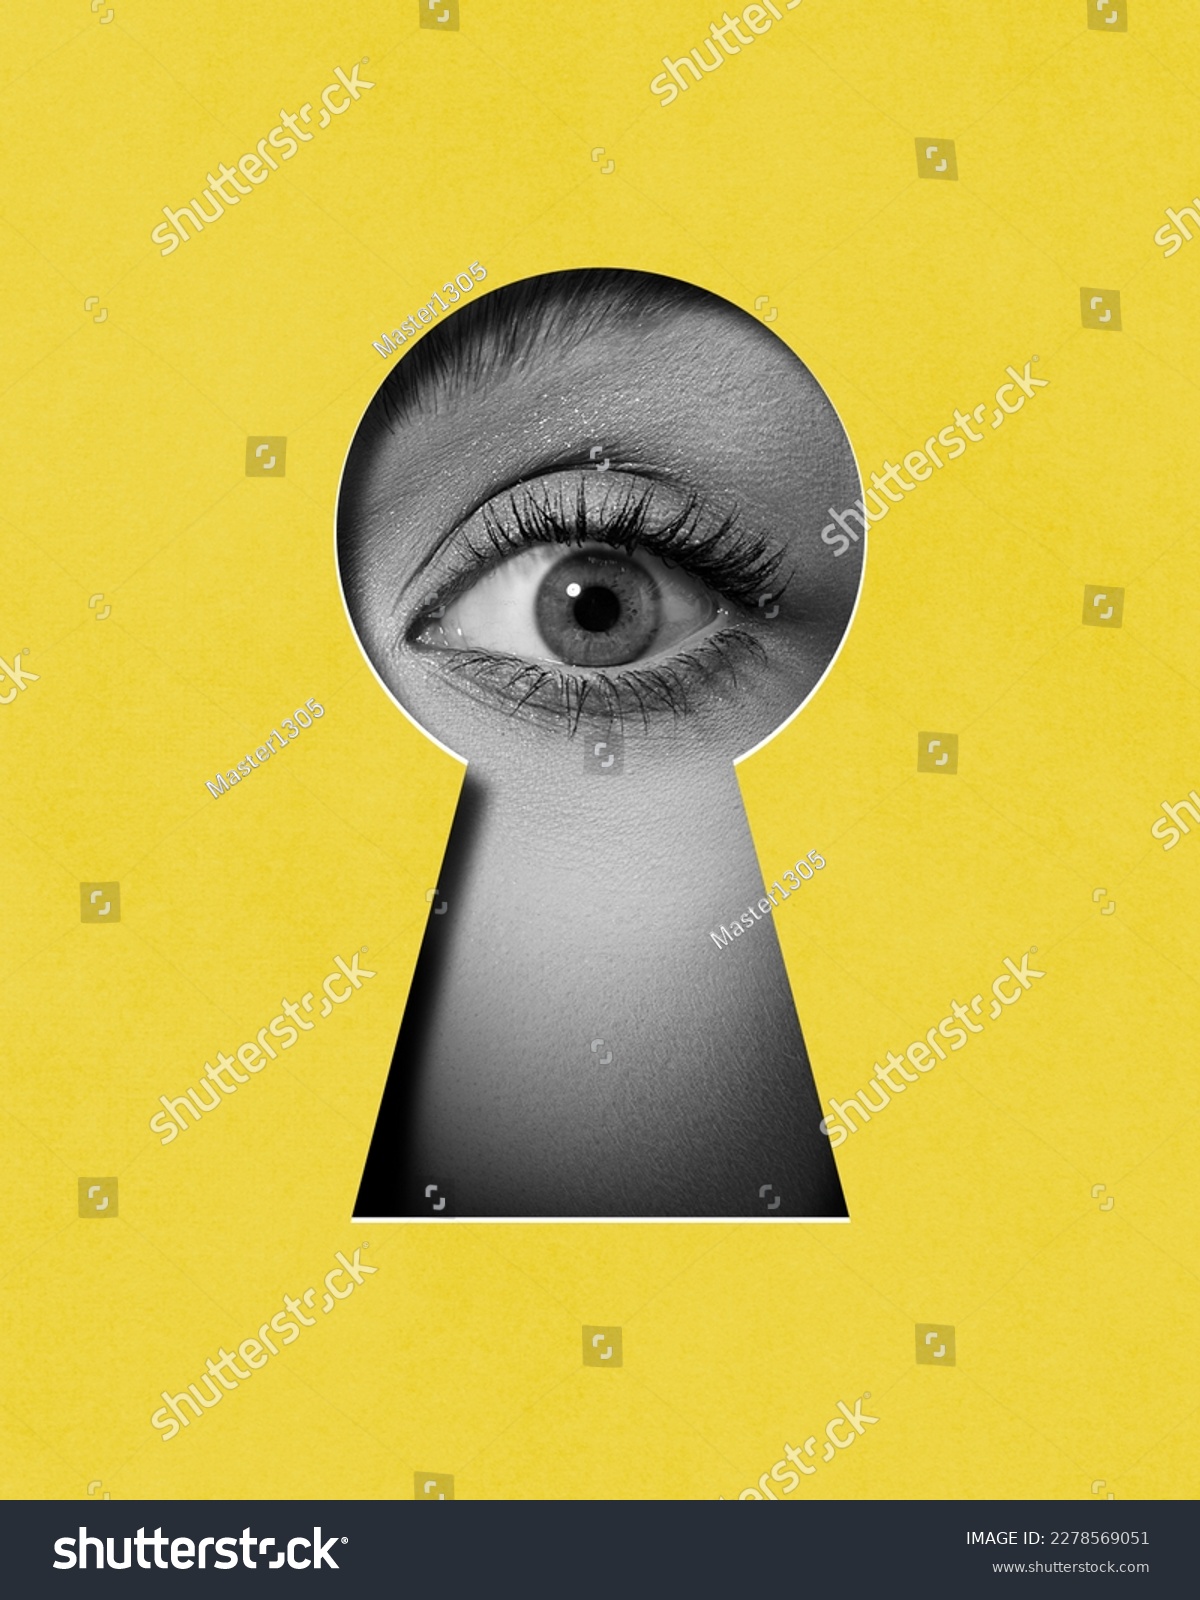 Hidden secrets. Female eye attentively looking into keyhole against yellow background. Contemporary art collage. Conceptual design. Concept of creativity, abstract art, imagination and inspiration. #2278569051